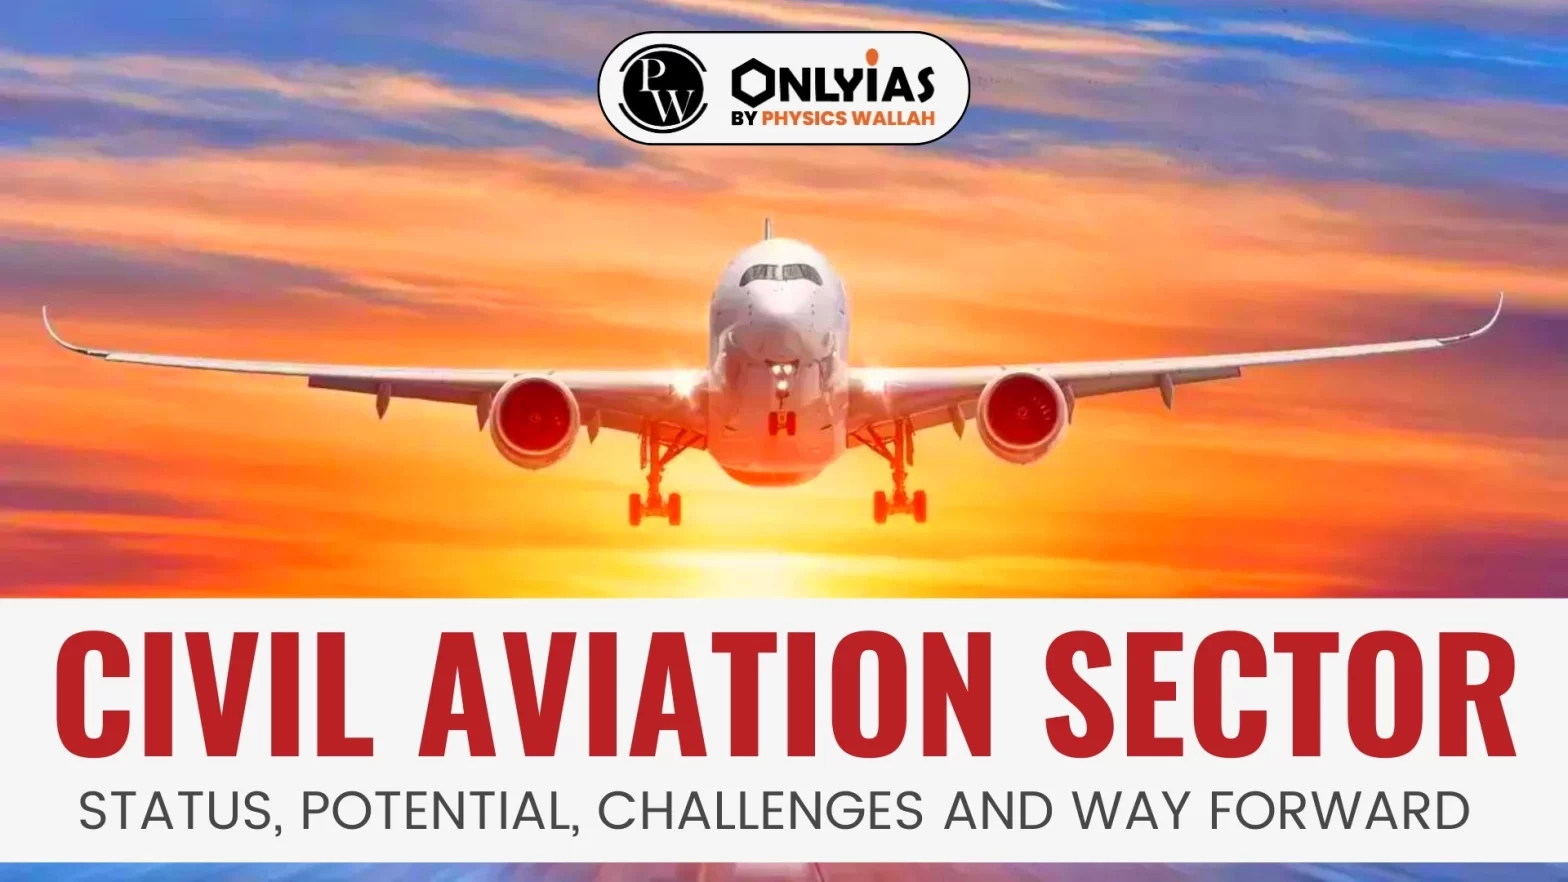 Civil Aviation Sector: Status, Potential, Challenges and Way Forward